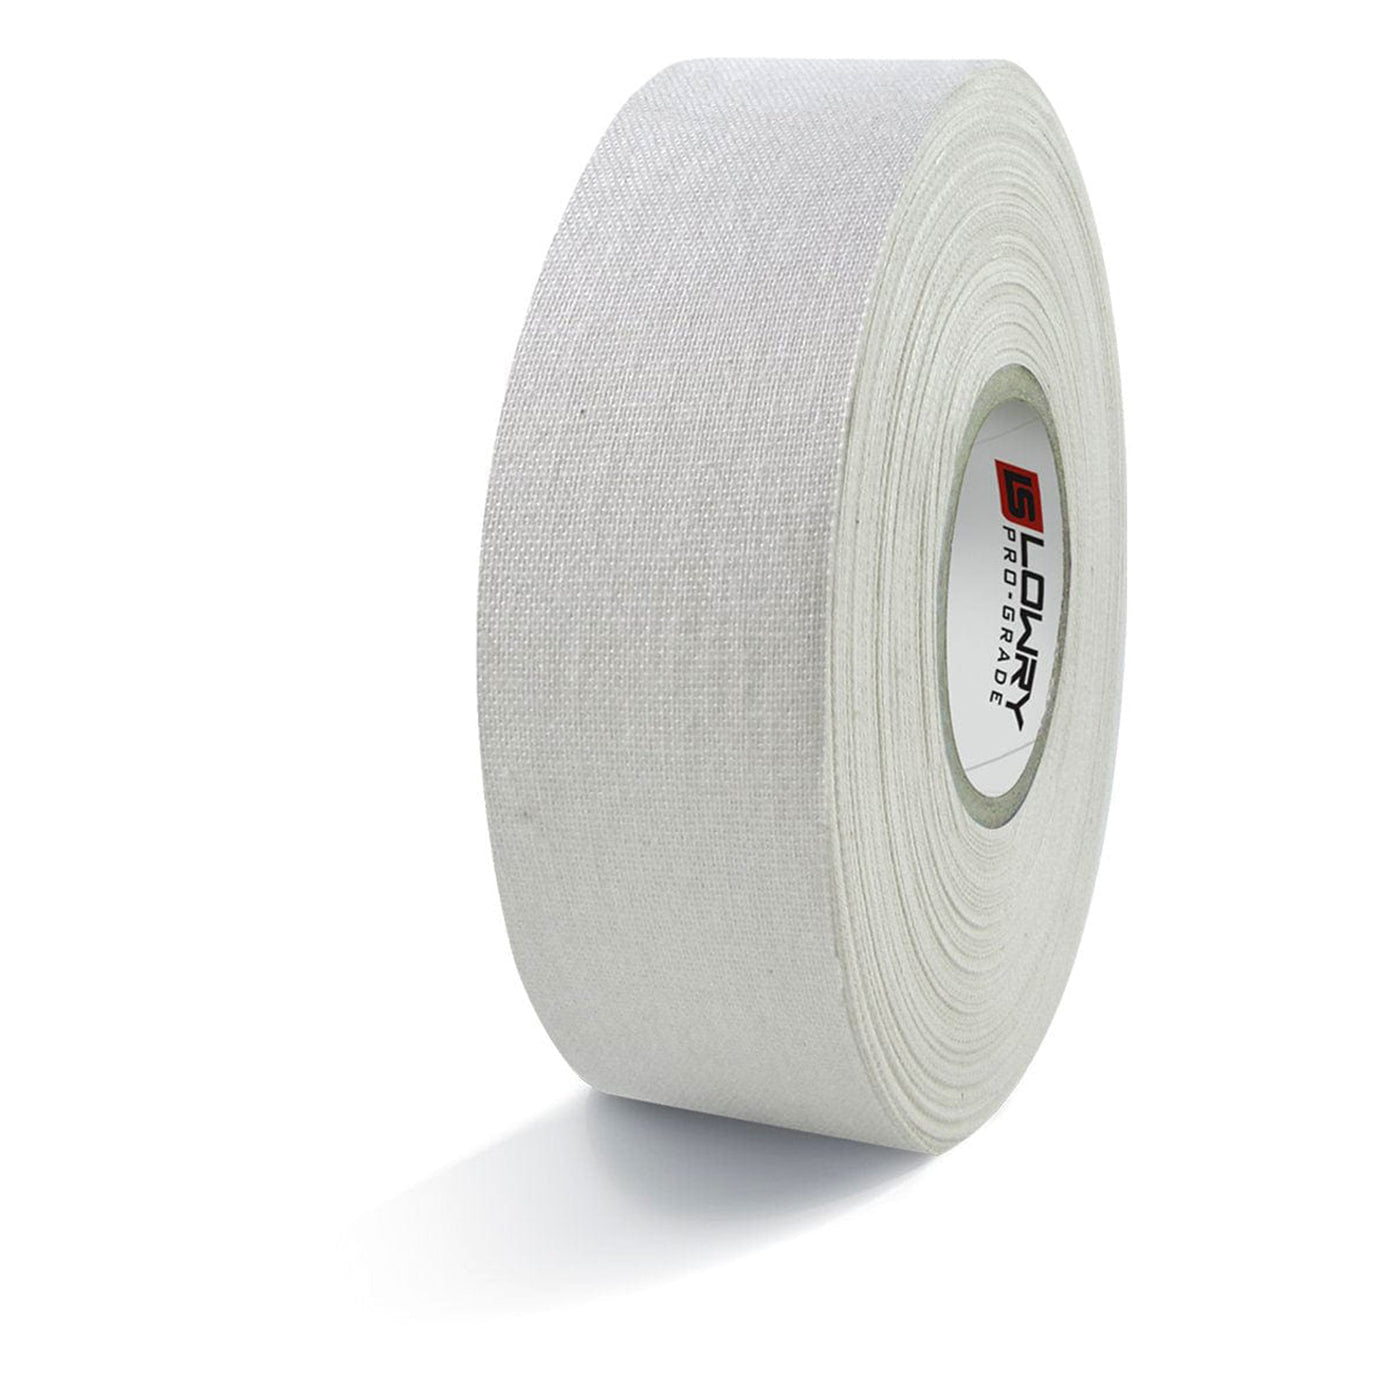 Lowry Sports Pro-Grade White Hockey Stick Tape - Large Roll - The Hockey Shop Source For Sports